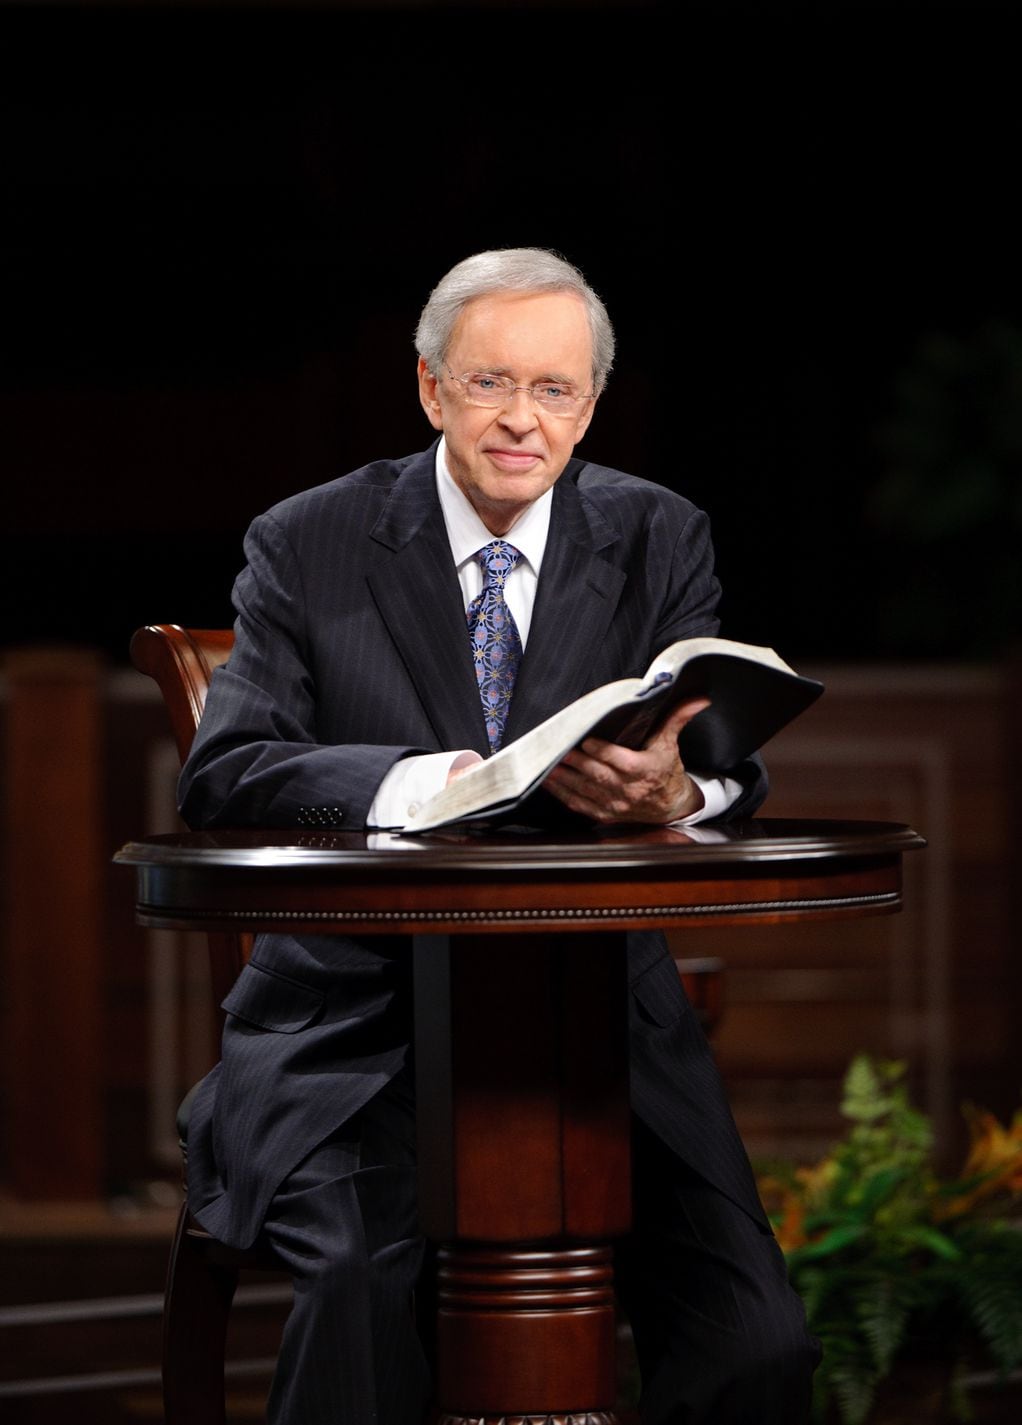 BREAKING NEWS! DR. CHARLES STANLEY HAS DIED. Daniel Whyte III, President Of Gospel Light Society International, Says Dr. Charles Stanley Was The Prince Of Preachers Of Our Time. Whyte Says Charles Stanley’s Preaching Had An Explosive Energetic Pop Because Stanley Firmly Believed In The Power Of Prayer And The Authority Of The Word Of God. Brother Charles Stanley Is Now Home With The Lord, Who Loved Him So Much And Whom He Loved So Much. “. . . WE MUST THROUGH MUCH TRIBULATION ENTER INTO THE KINGDOM OF GOD.” Blackchristiannews.com Was The First Christian News Publication That Honored The Life Of Dr. Charles Stanley For Being America’s Pastor And Teacher, And For Showing the World How To Build An Integrated Church Effortlessly Through The Simple Preaching of The Gospel, The Whole Counsel Of God, And Genuine Love. Please Read All The Articles Below Honoring This Great Servant Of The Lord.